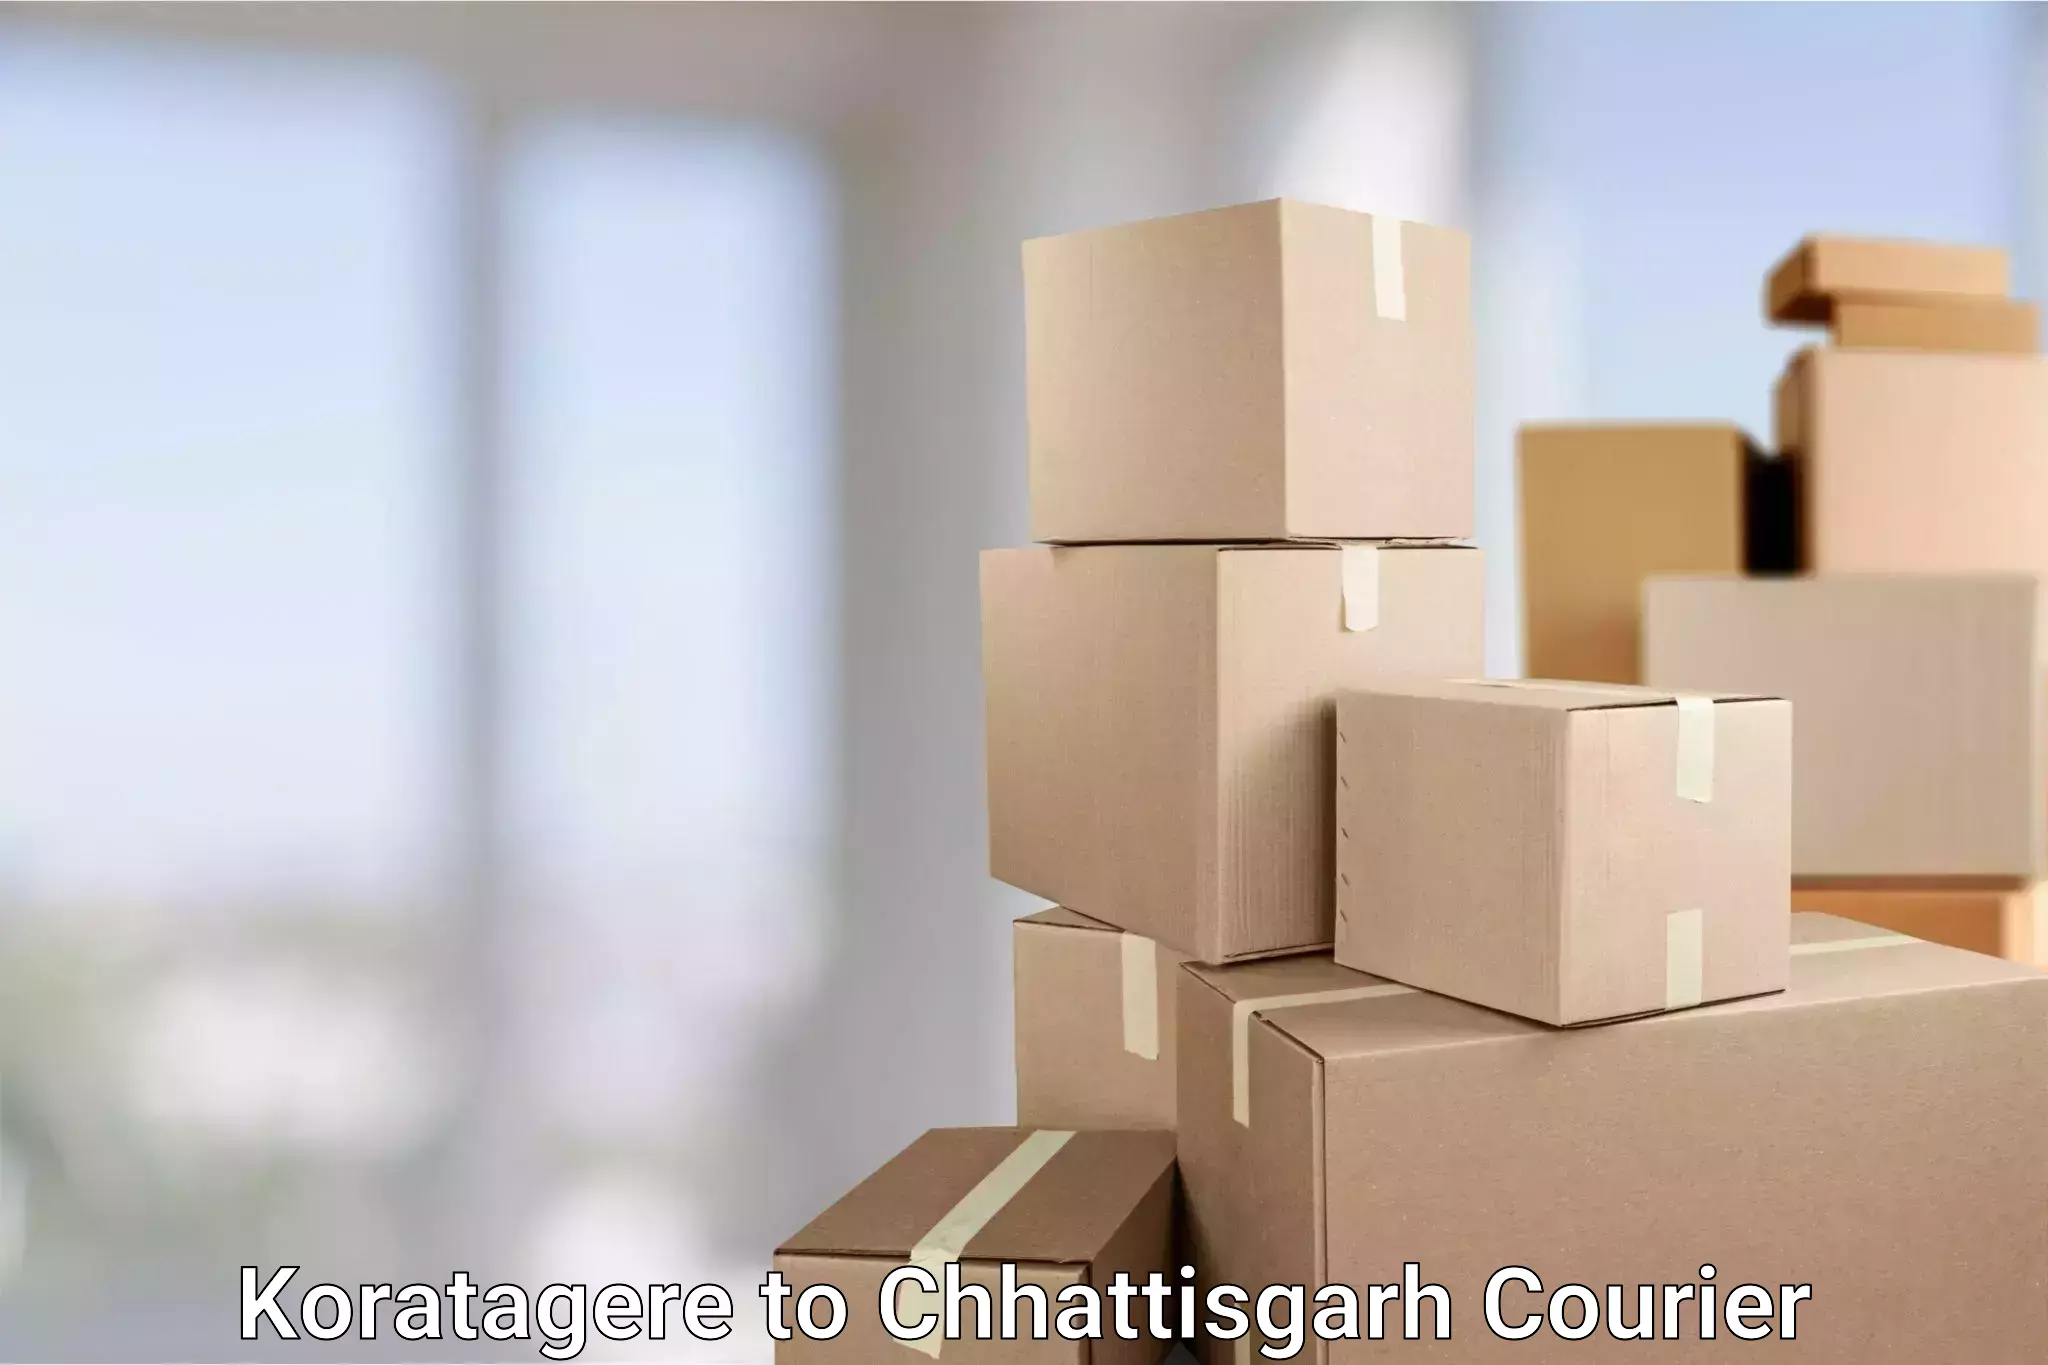 High-quality delivery services in Koratagere to Chhattisgarh